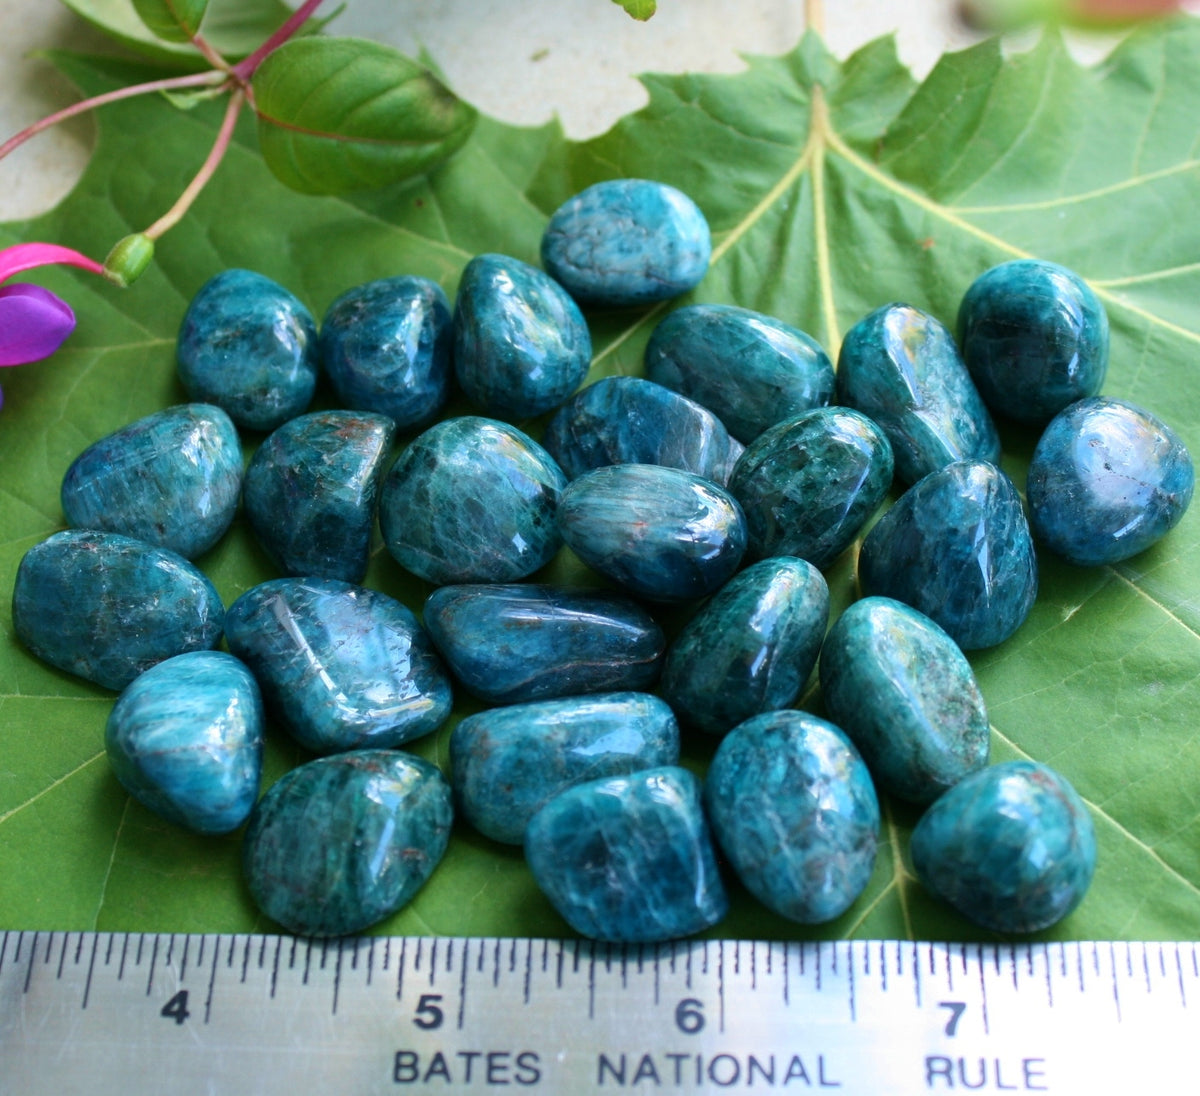 ONE Blue Apatite Polished Tumbled Stone from Madagascar, 6-10 grams each